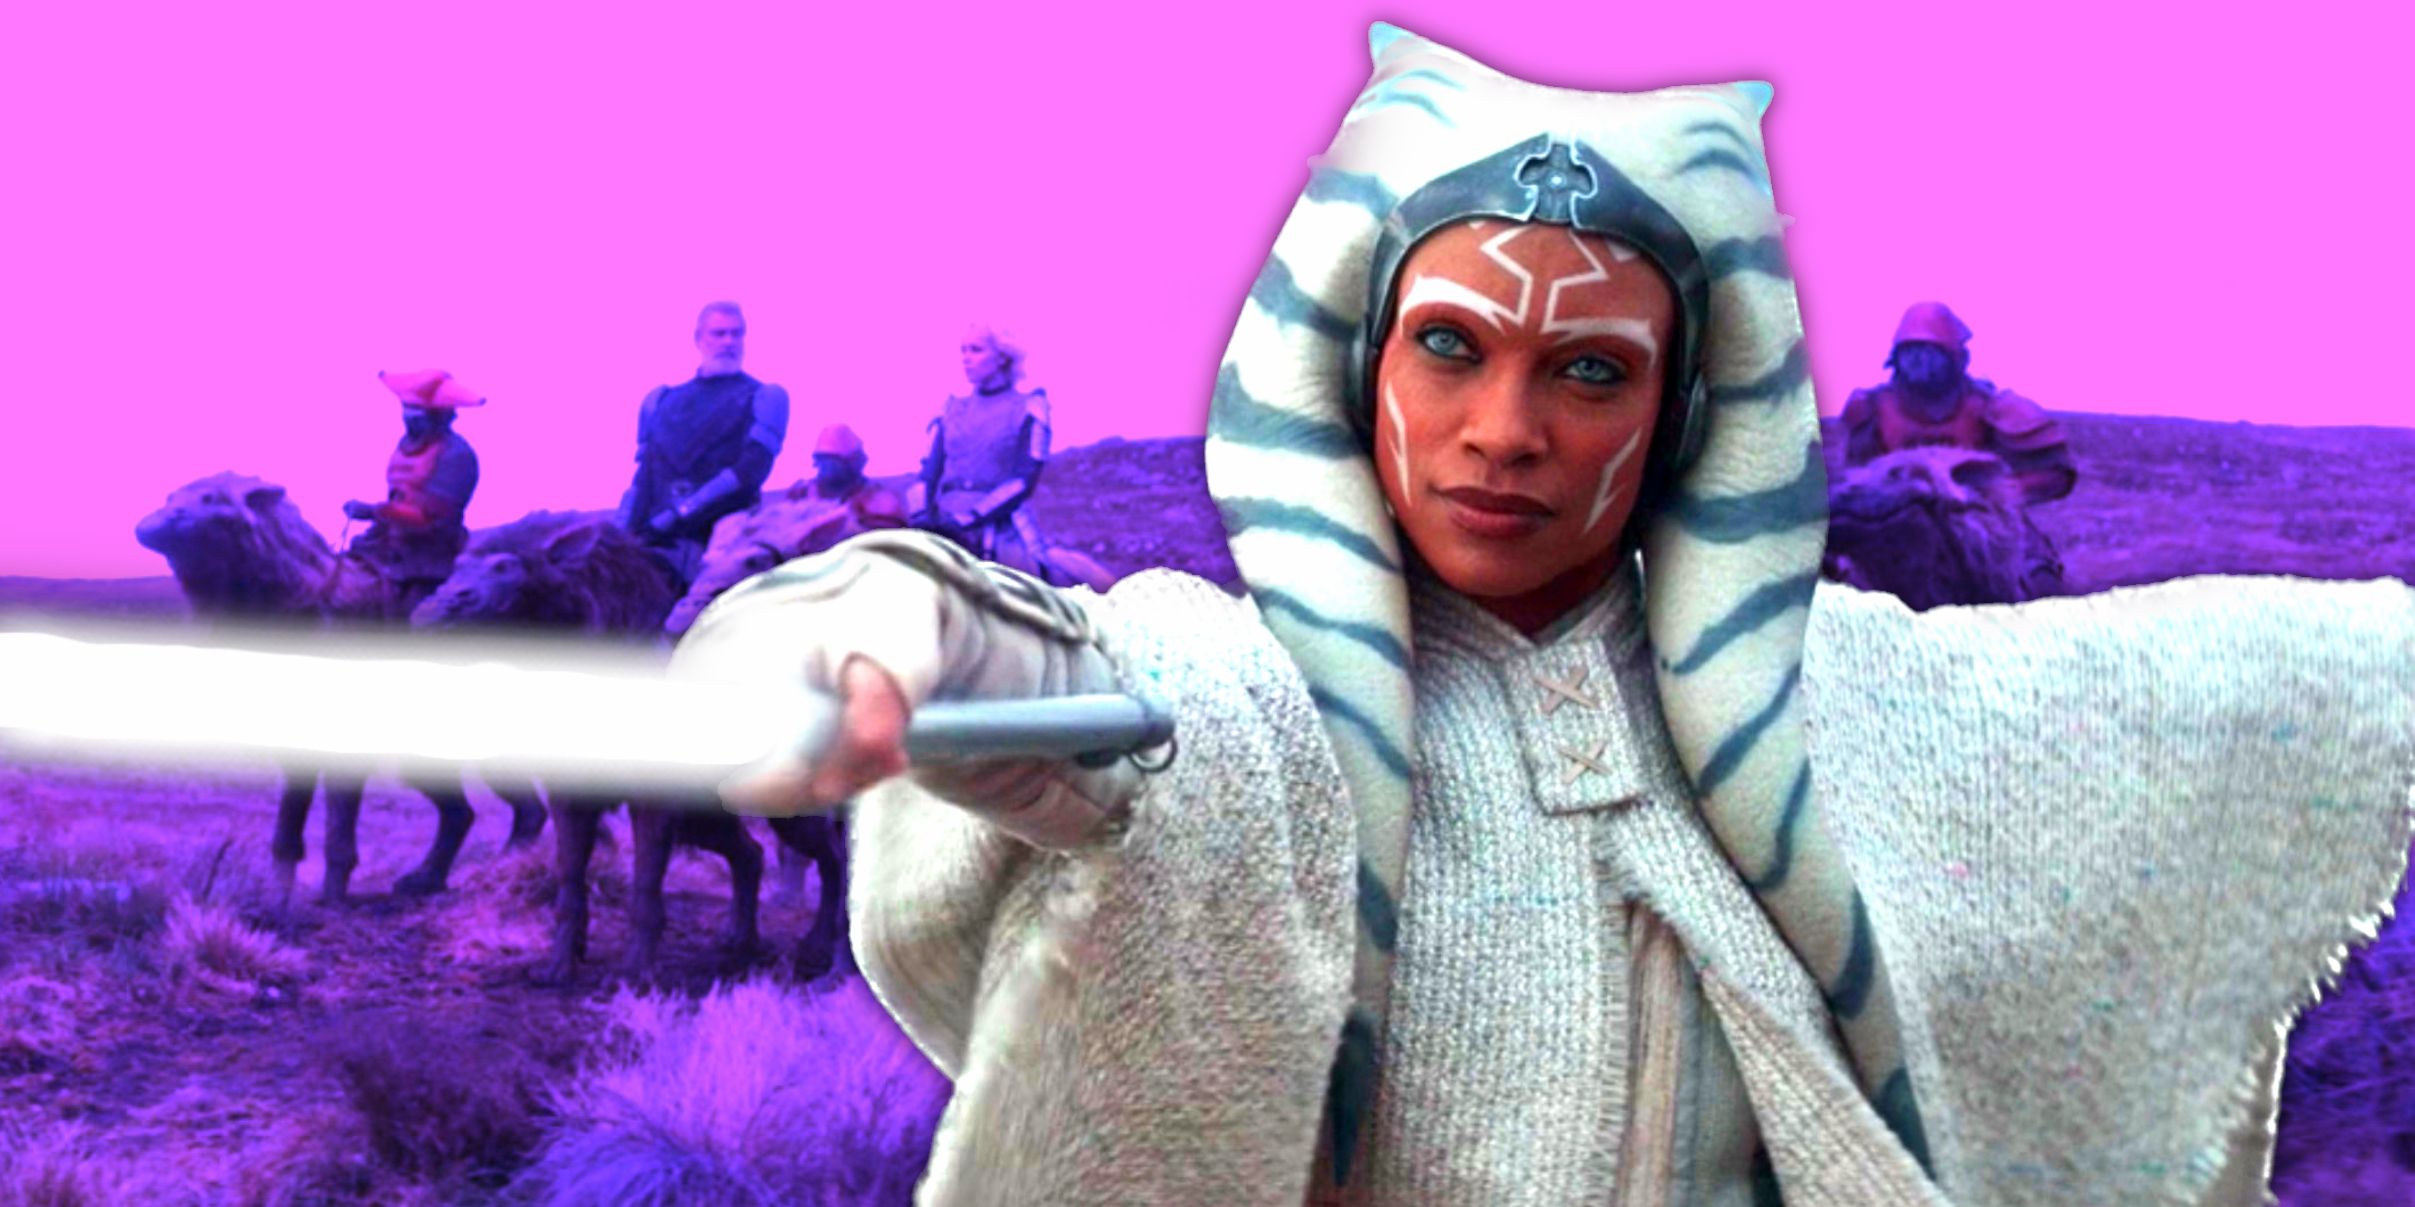 Ahsoka wields her lightsabers in episode, with Baylan, Shin and the bandits in the background.